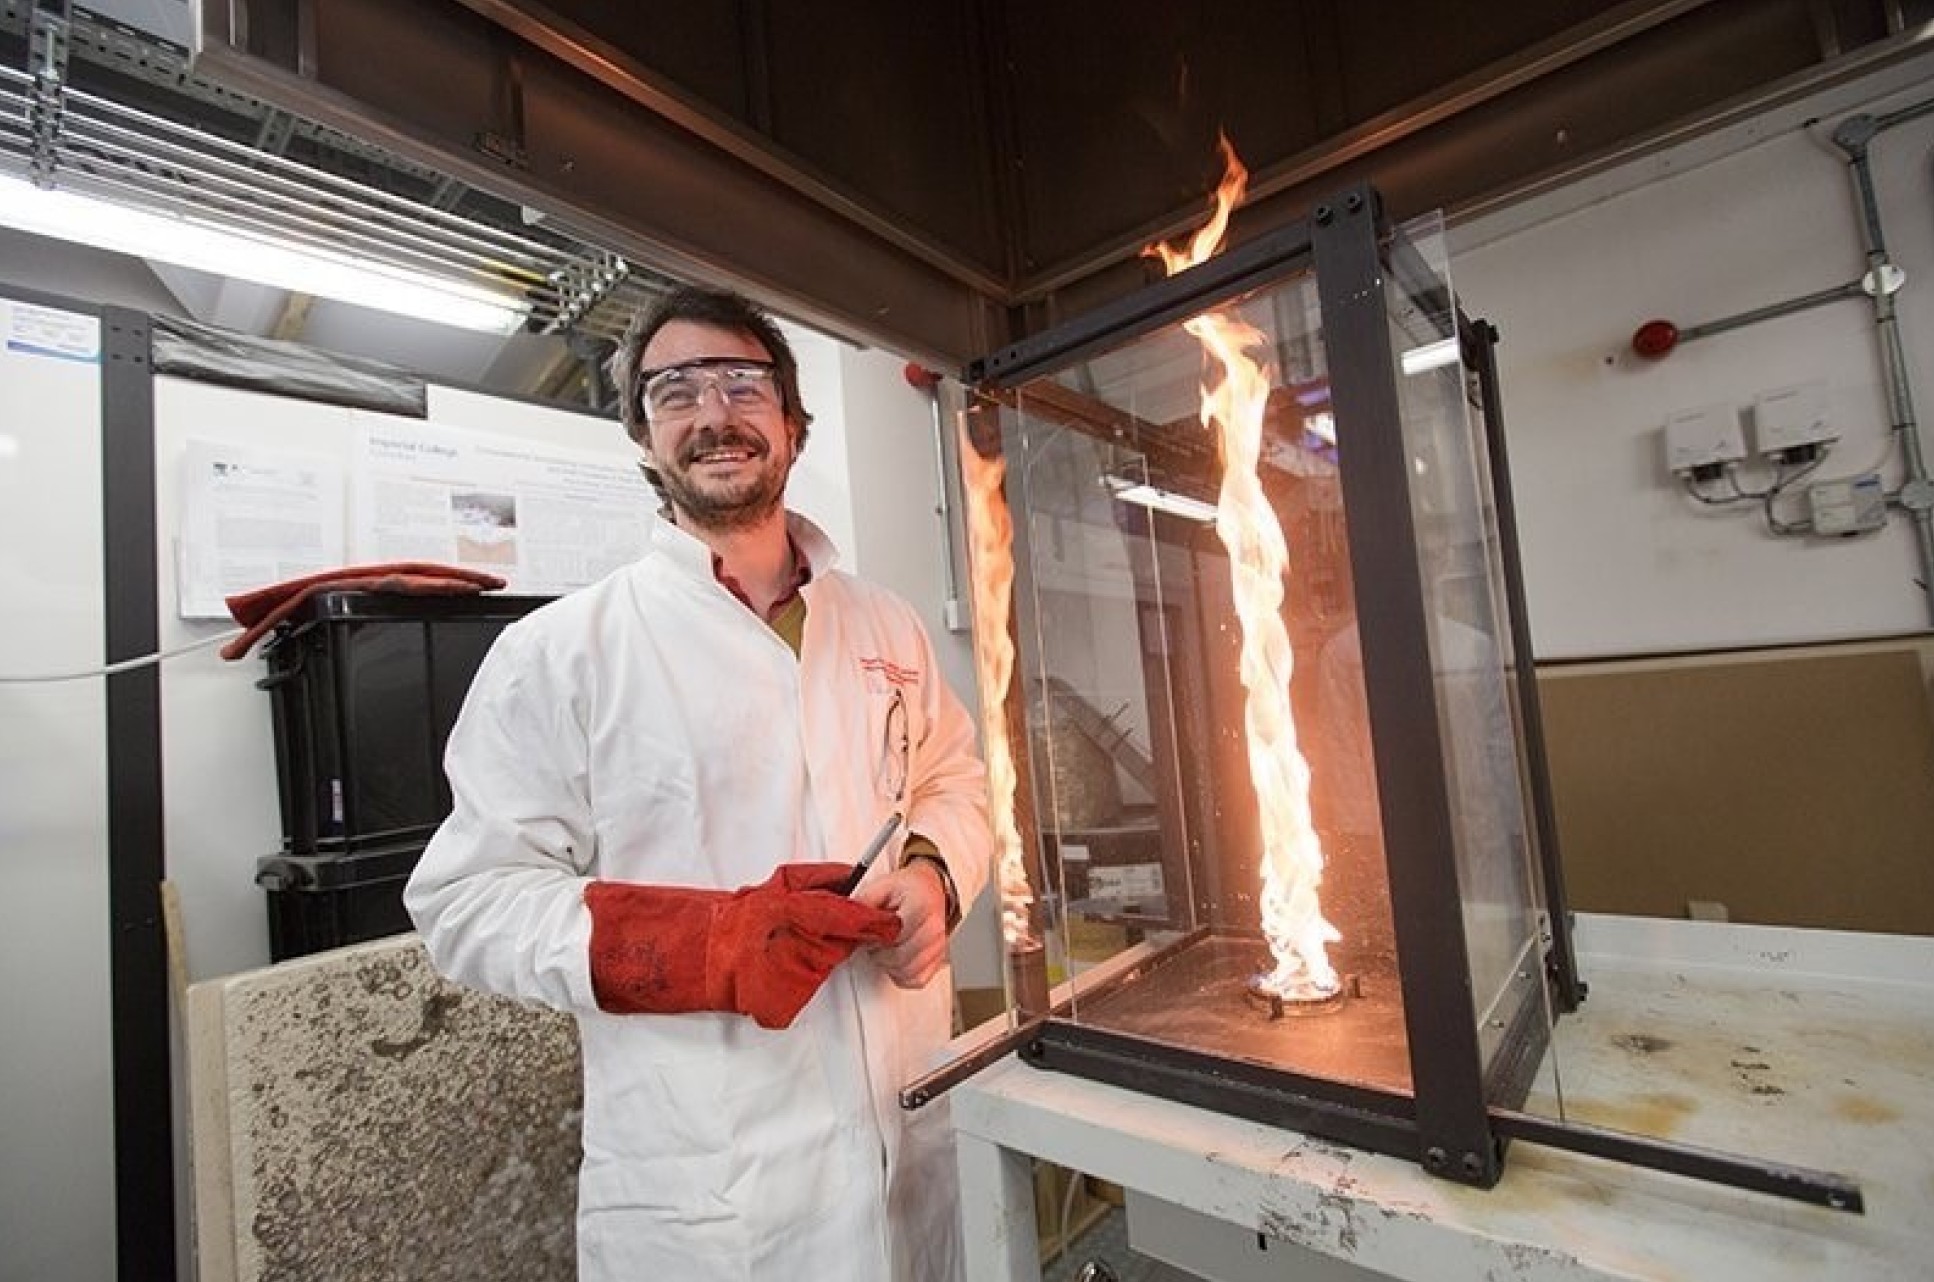 Conducting experiments in the fire lab of Imperial College London